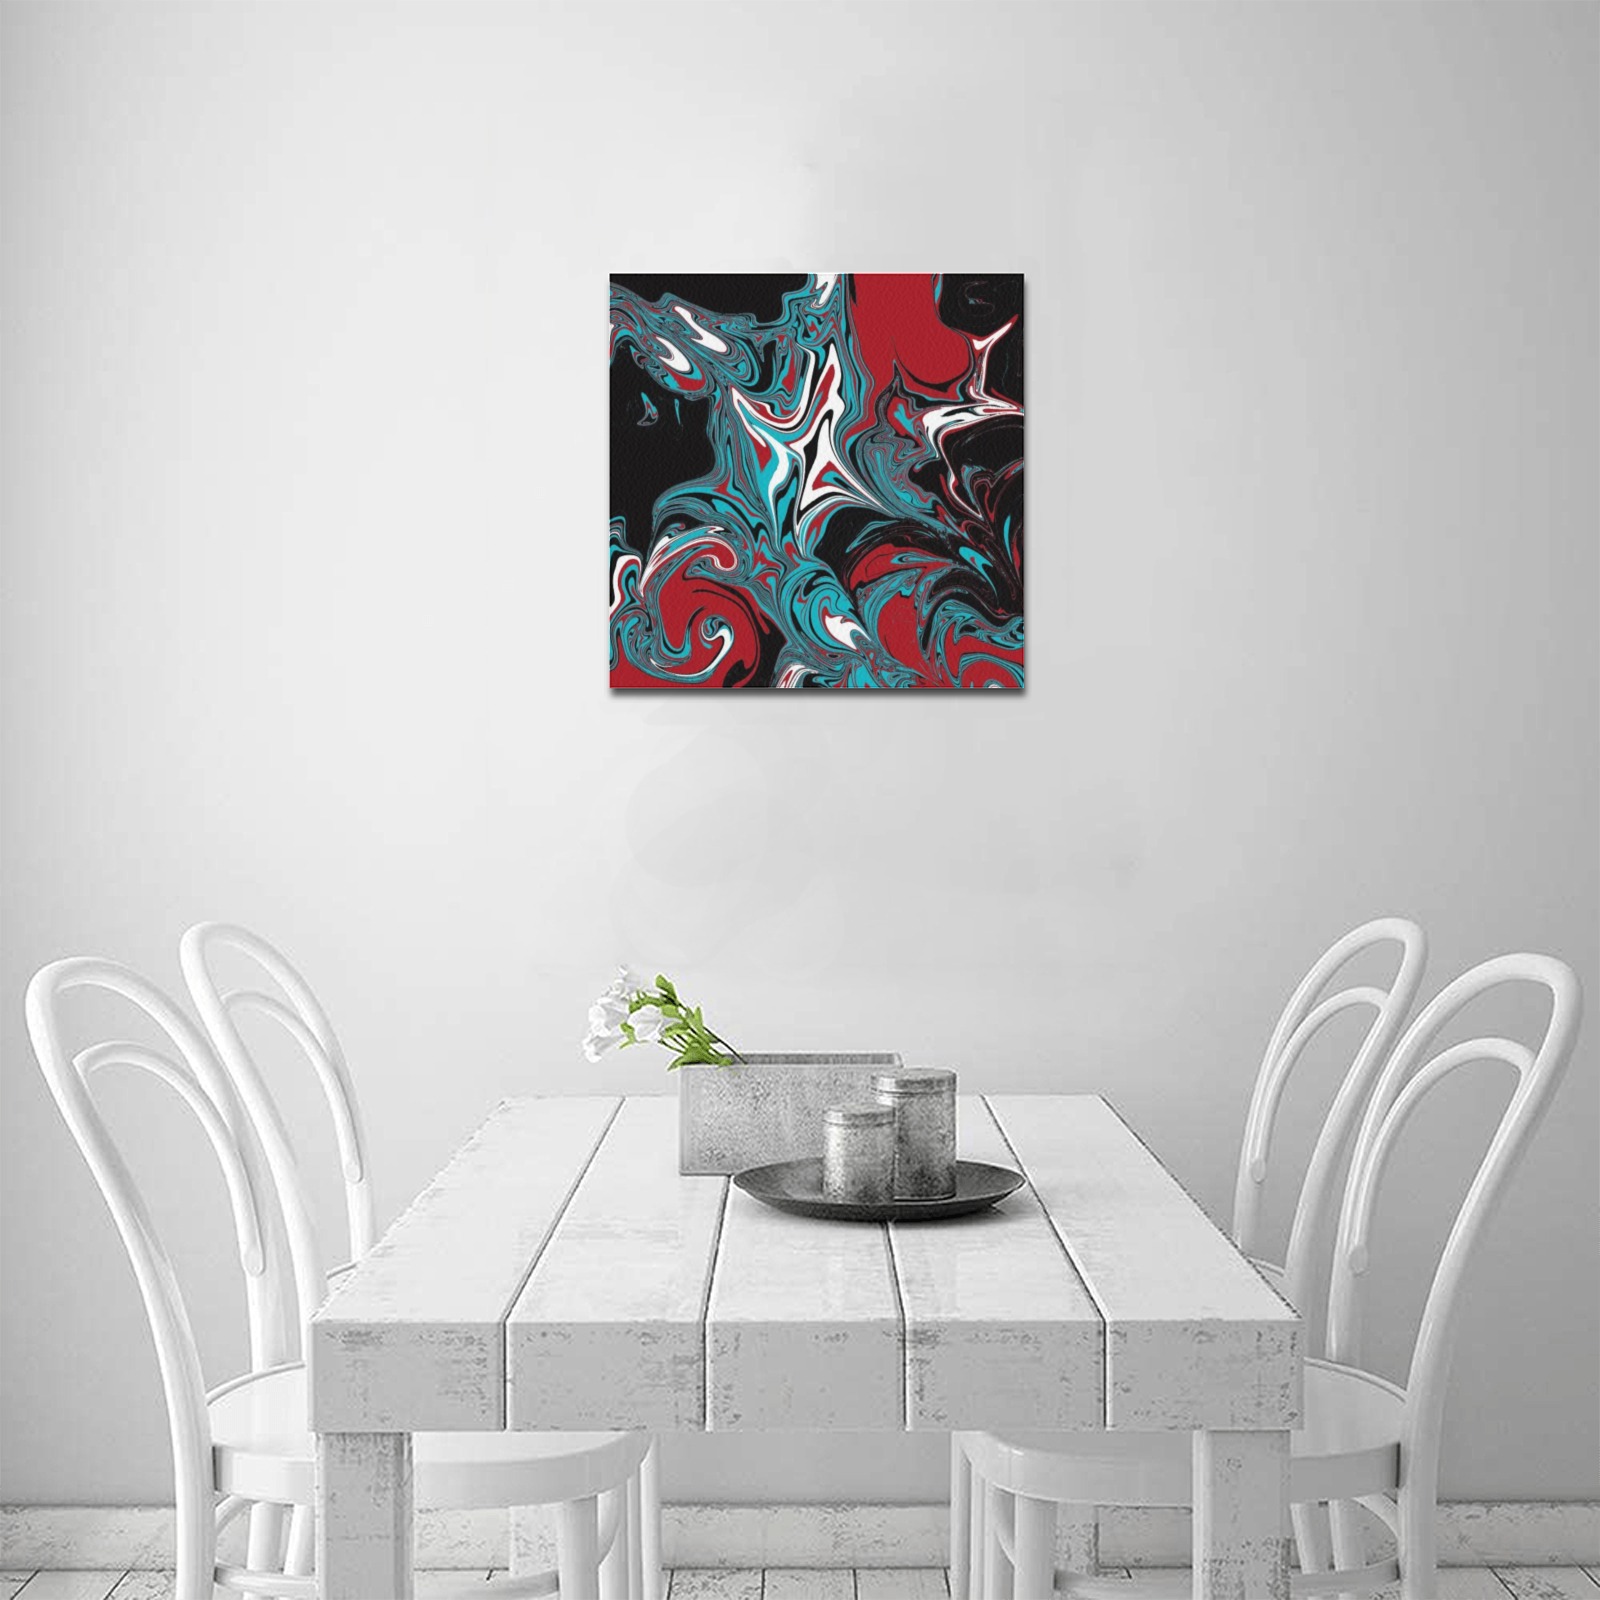 Dark Wave of Colors Frame Canvas Print 16"x16"